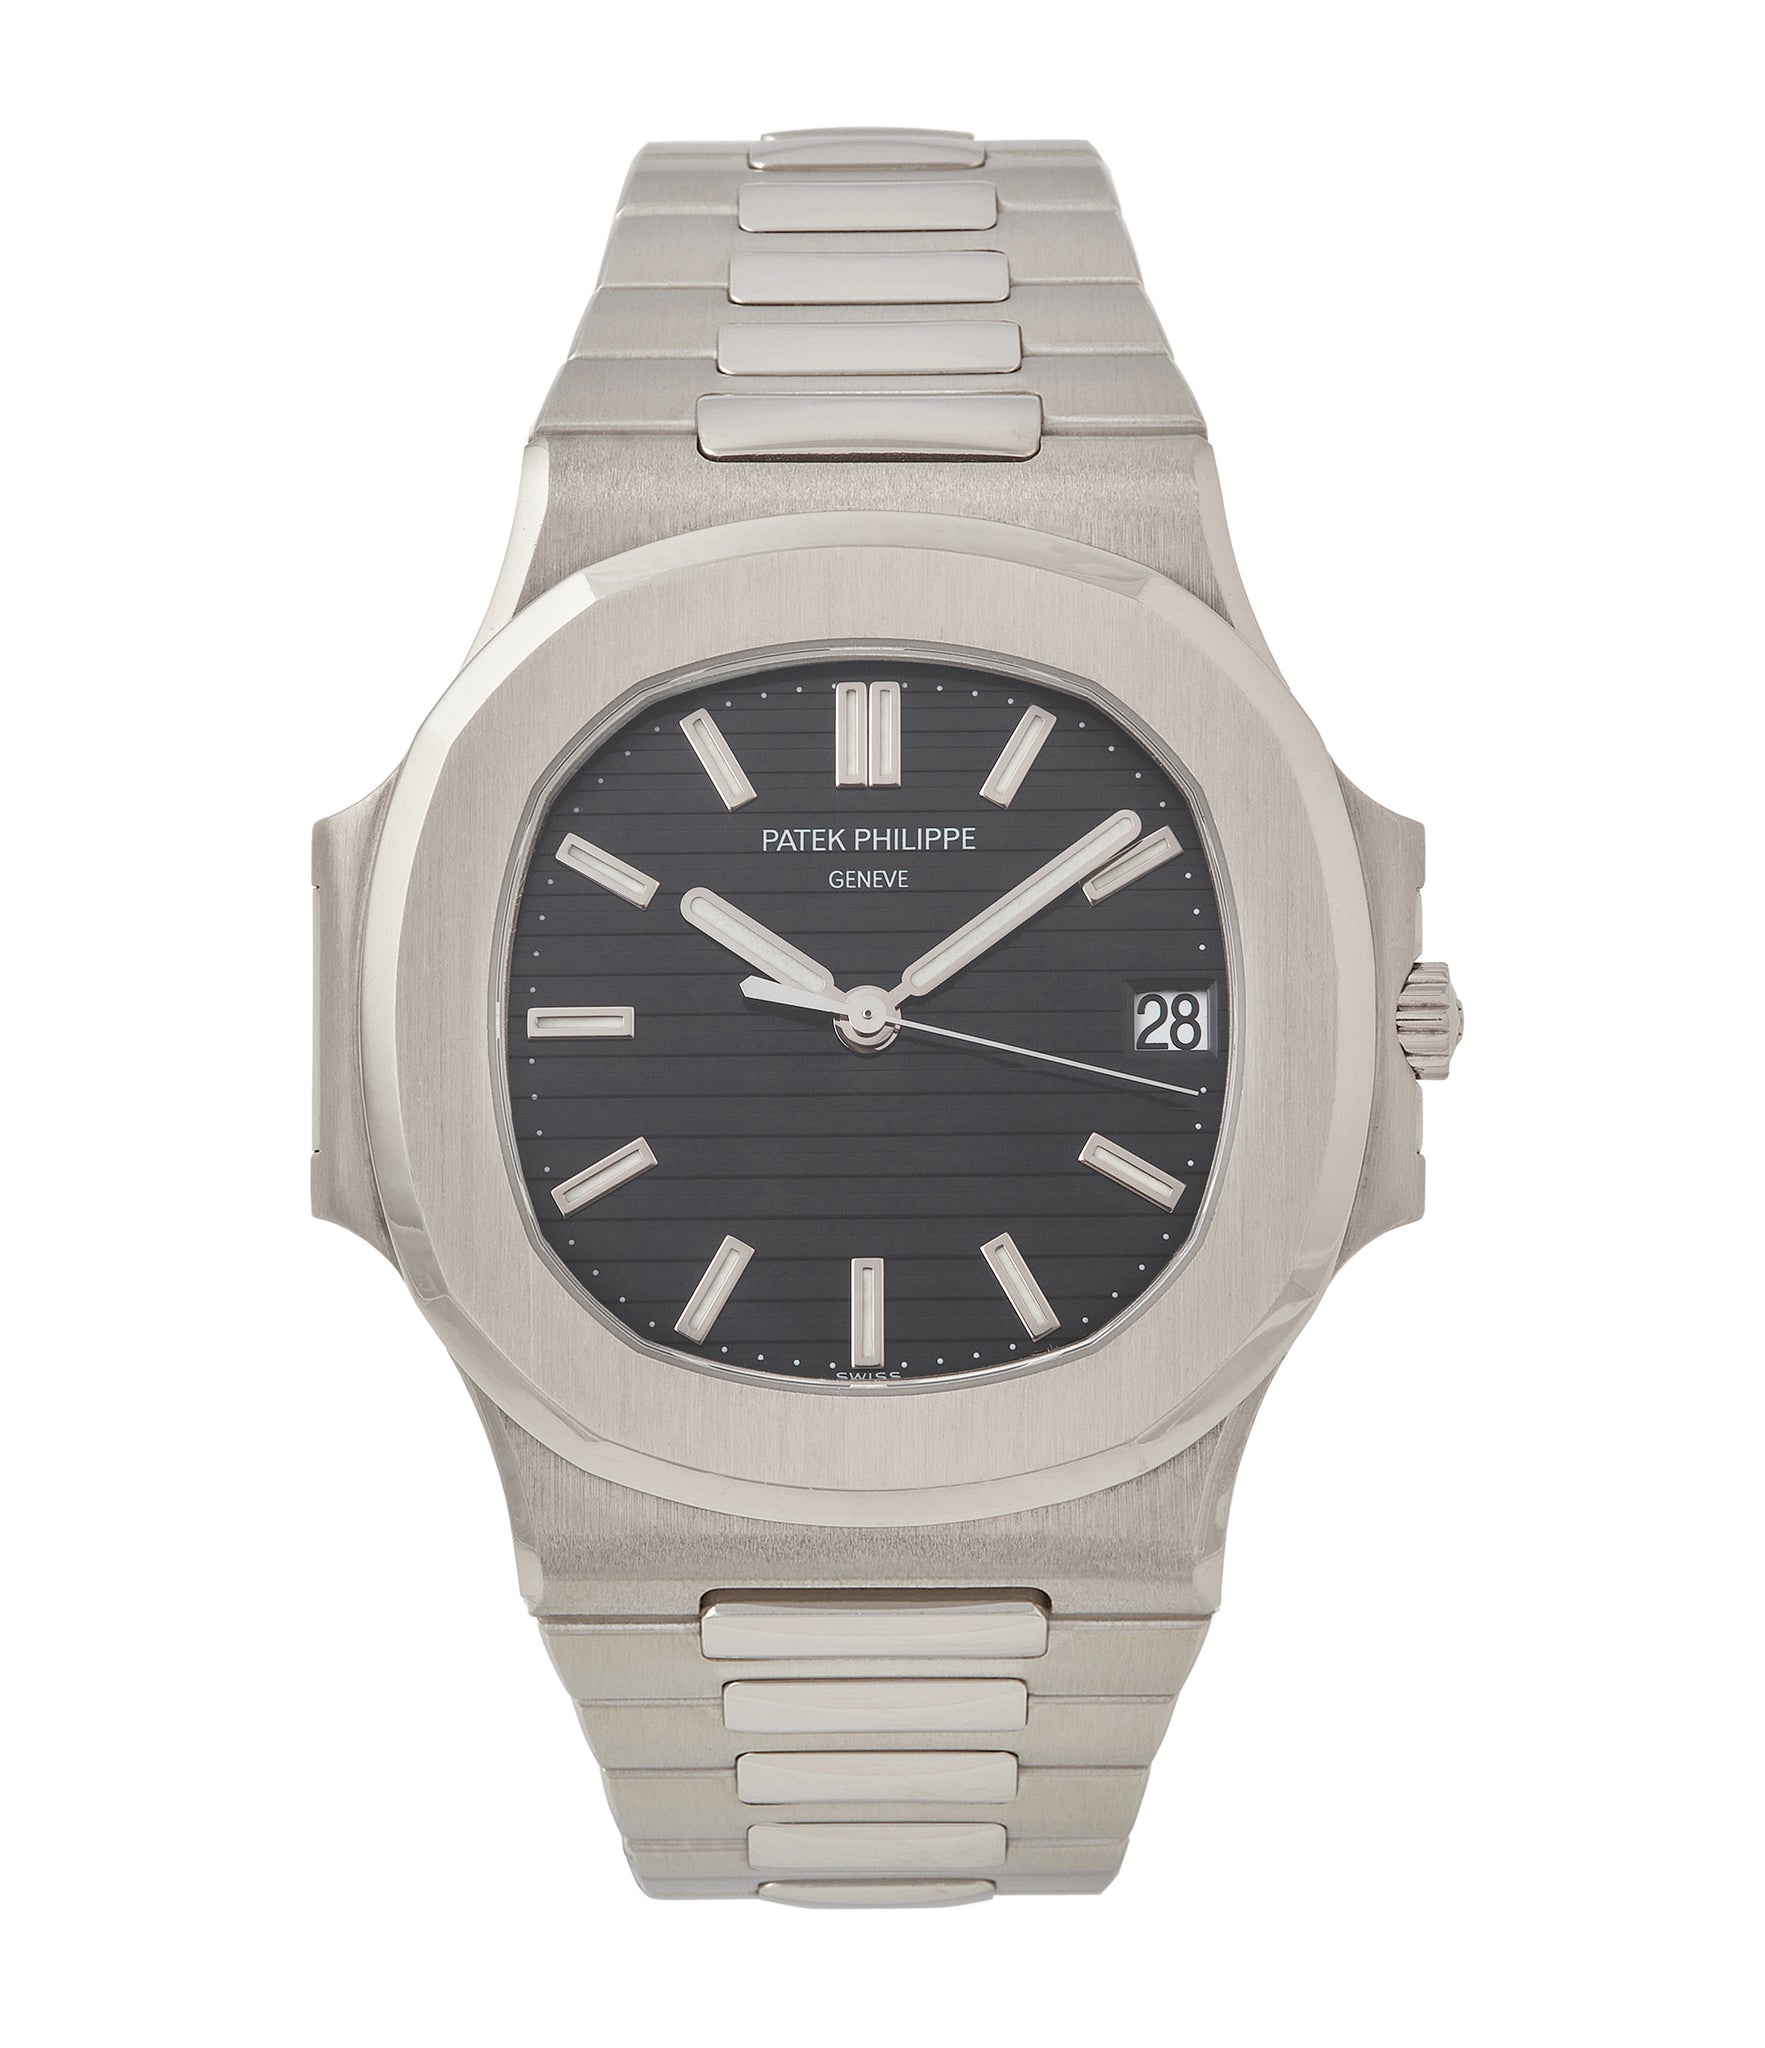 buy Patek Philippe Nautilus 3711/1G-001 white gold pre-owned watch for sale online at A Collected Man London UK specialist of rare watches